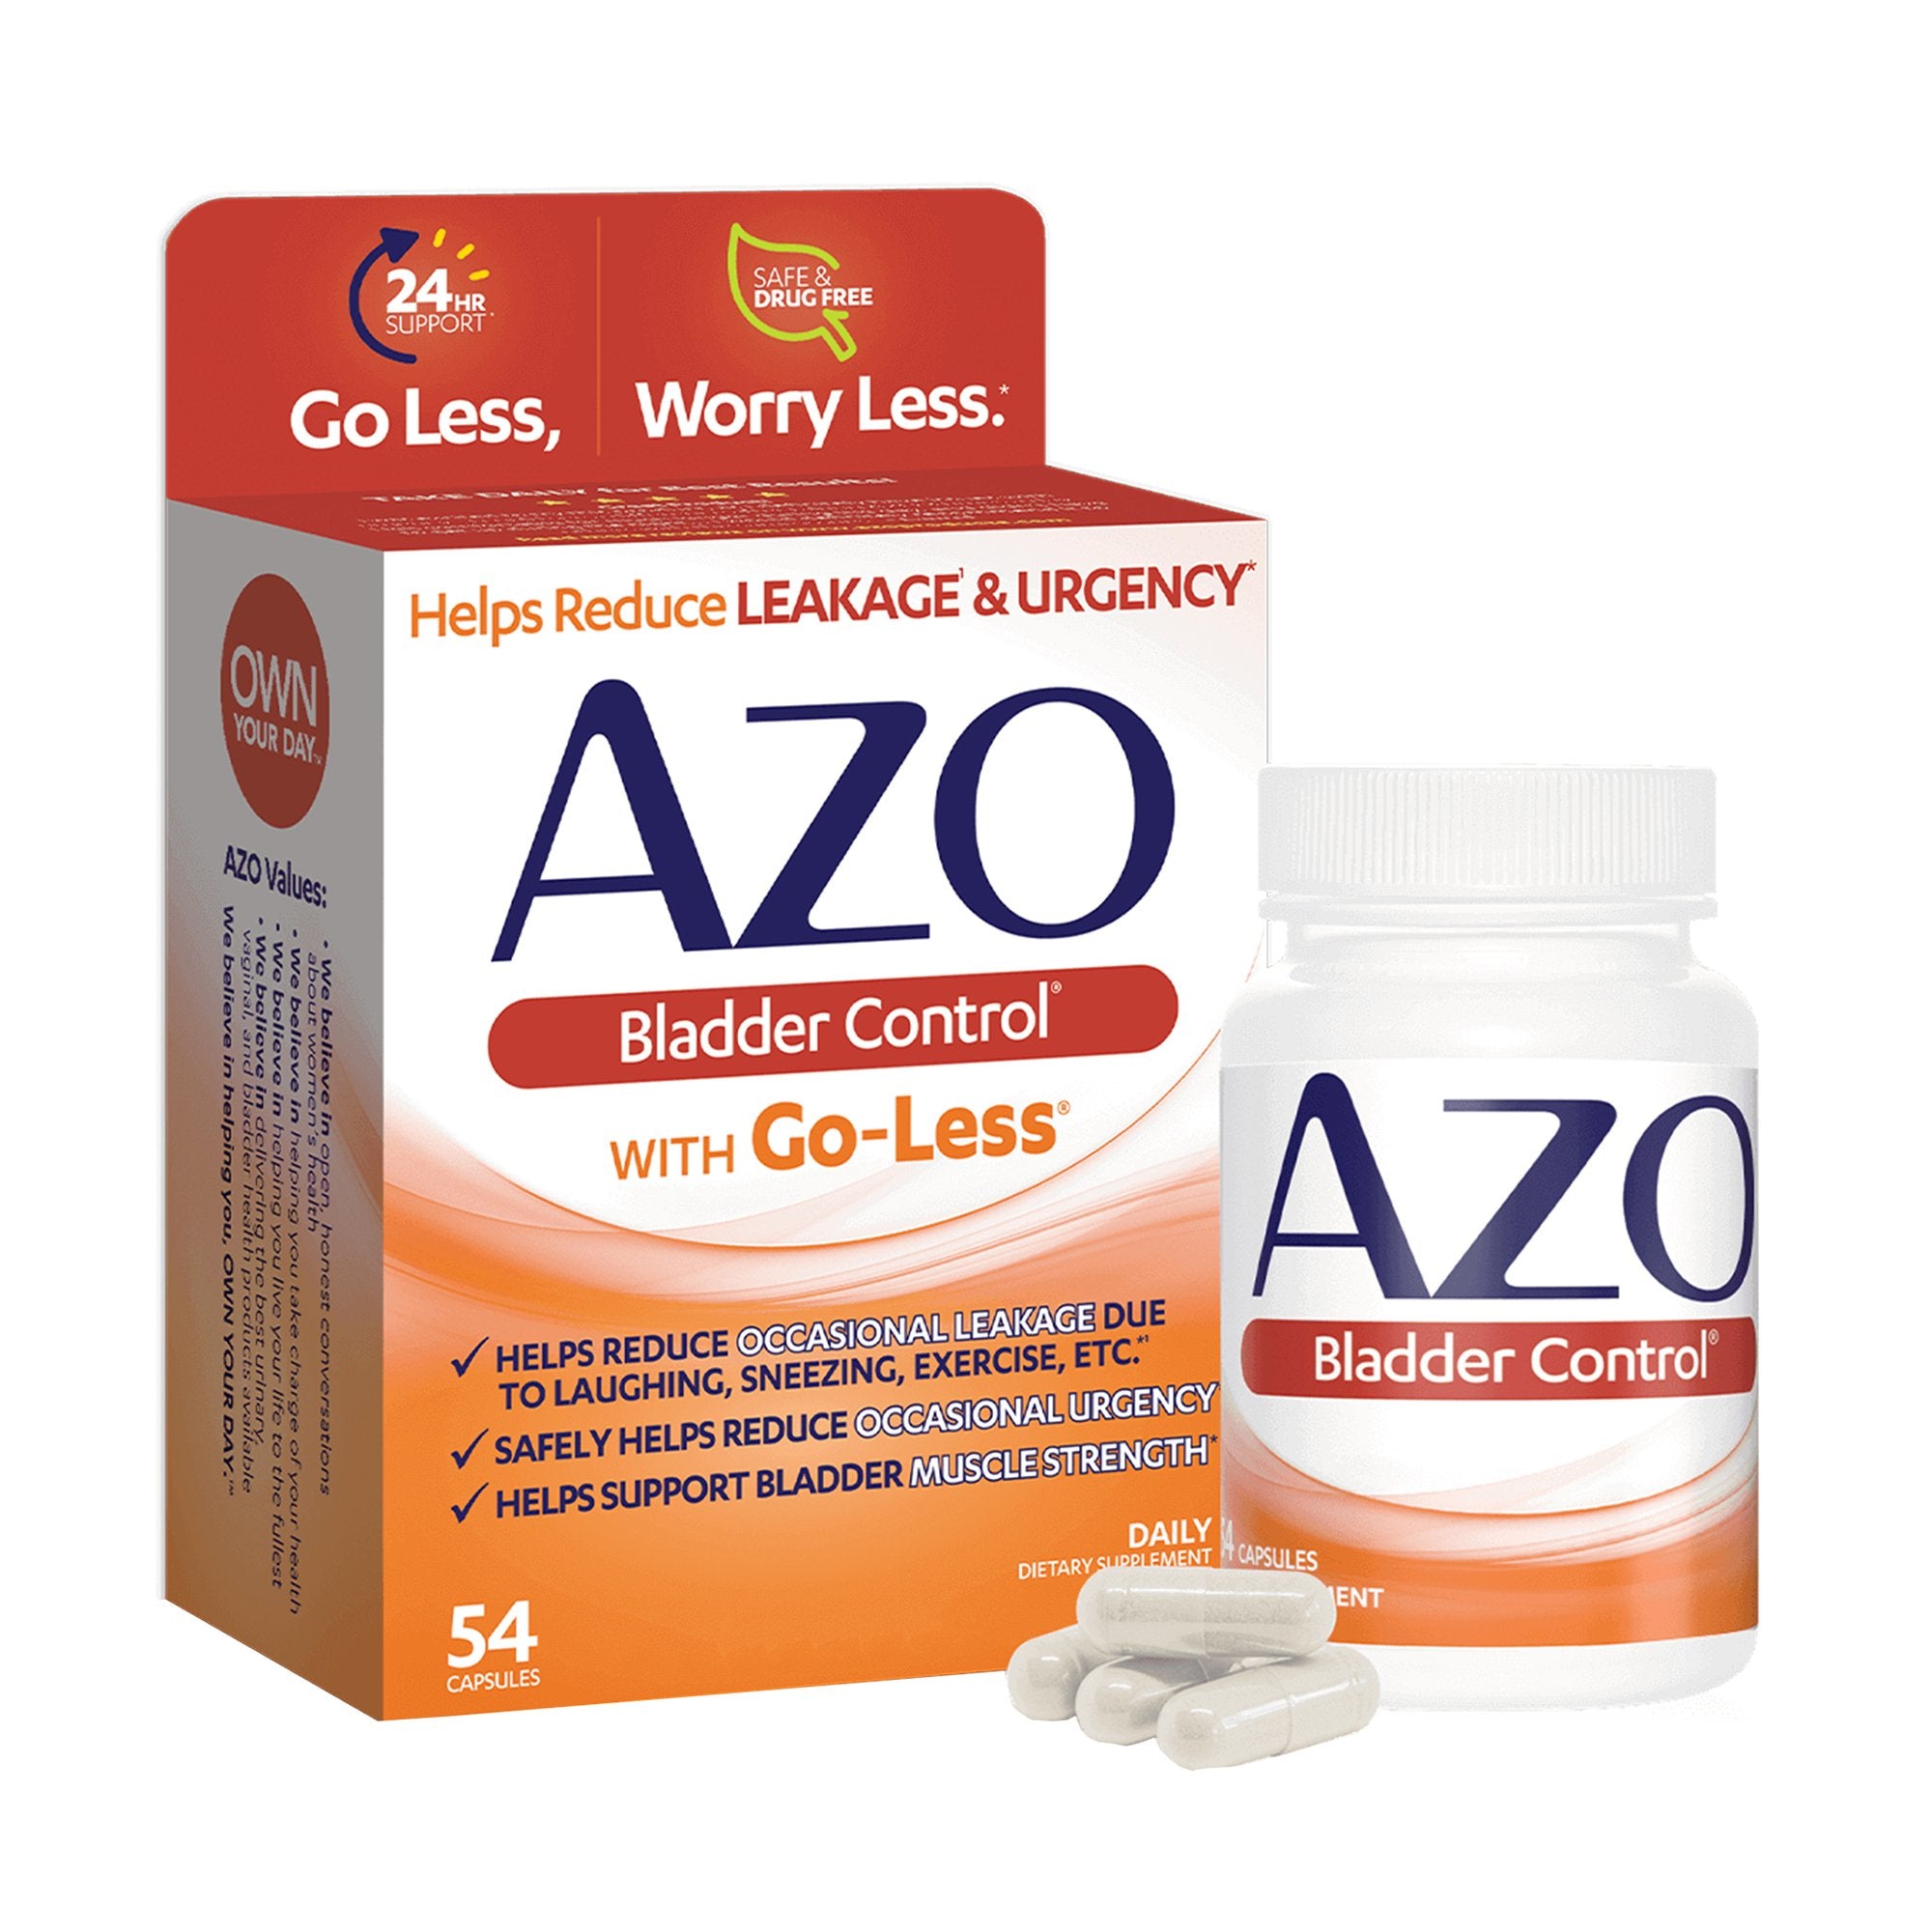 Urinary Pain Relief AZO Pumpkin Seed / Soy Germ Extracts Capsule 54 per Box